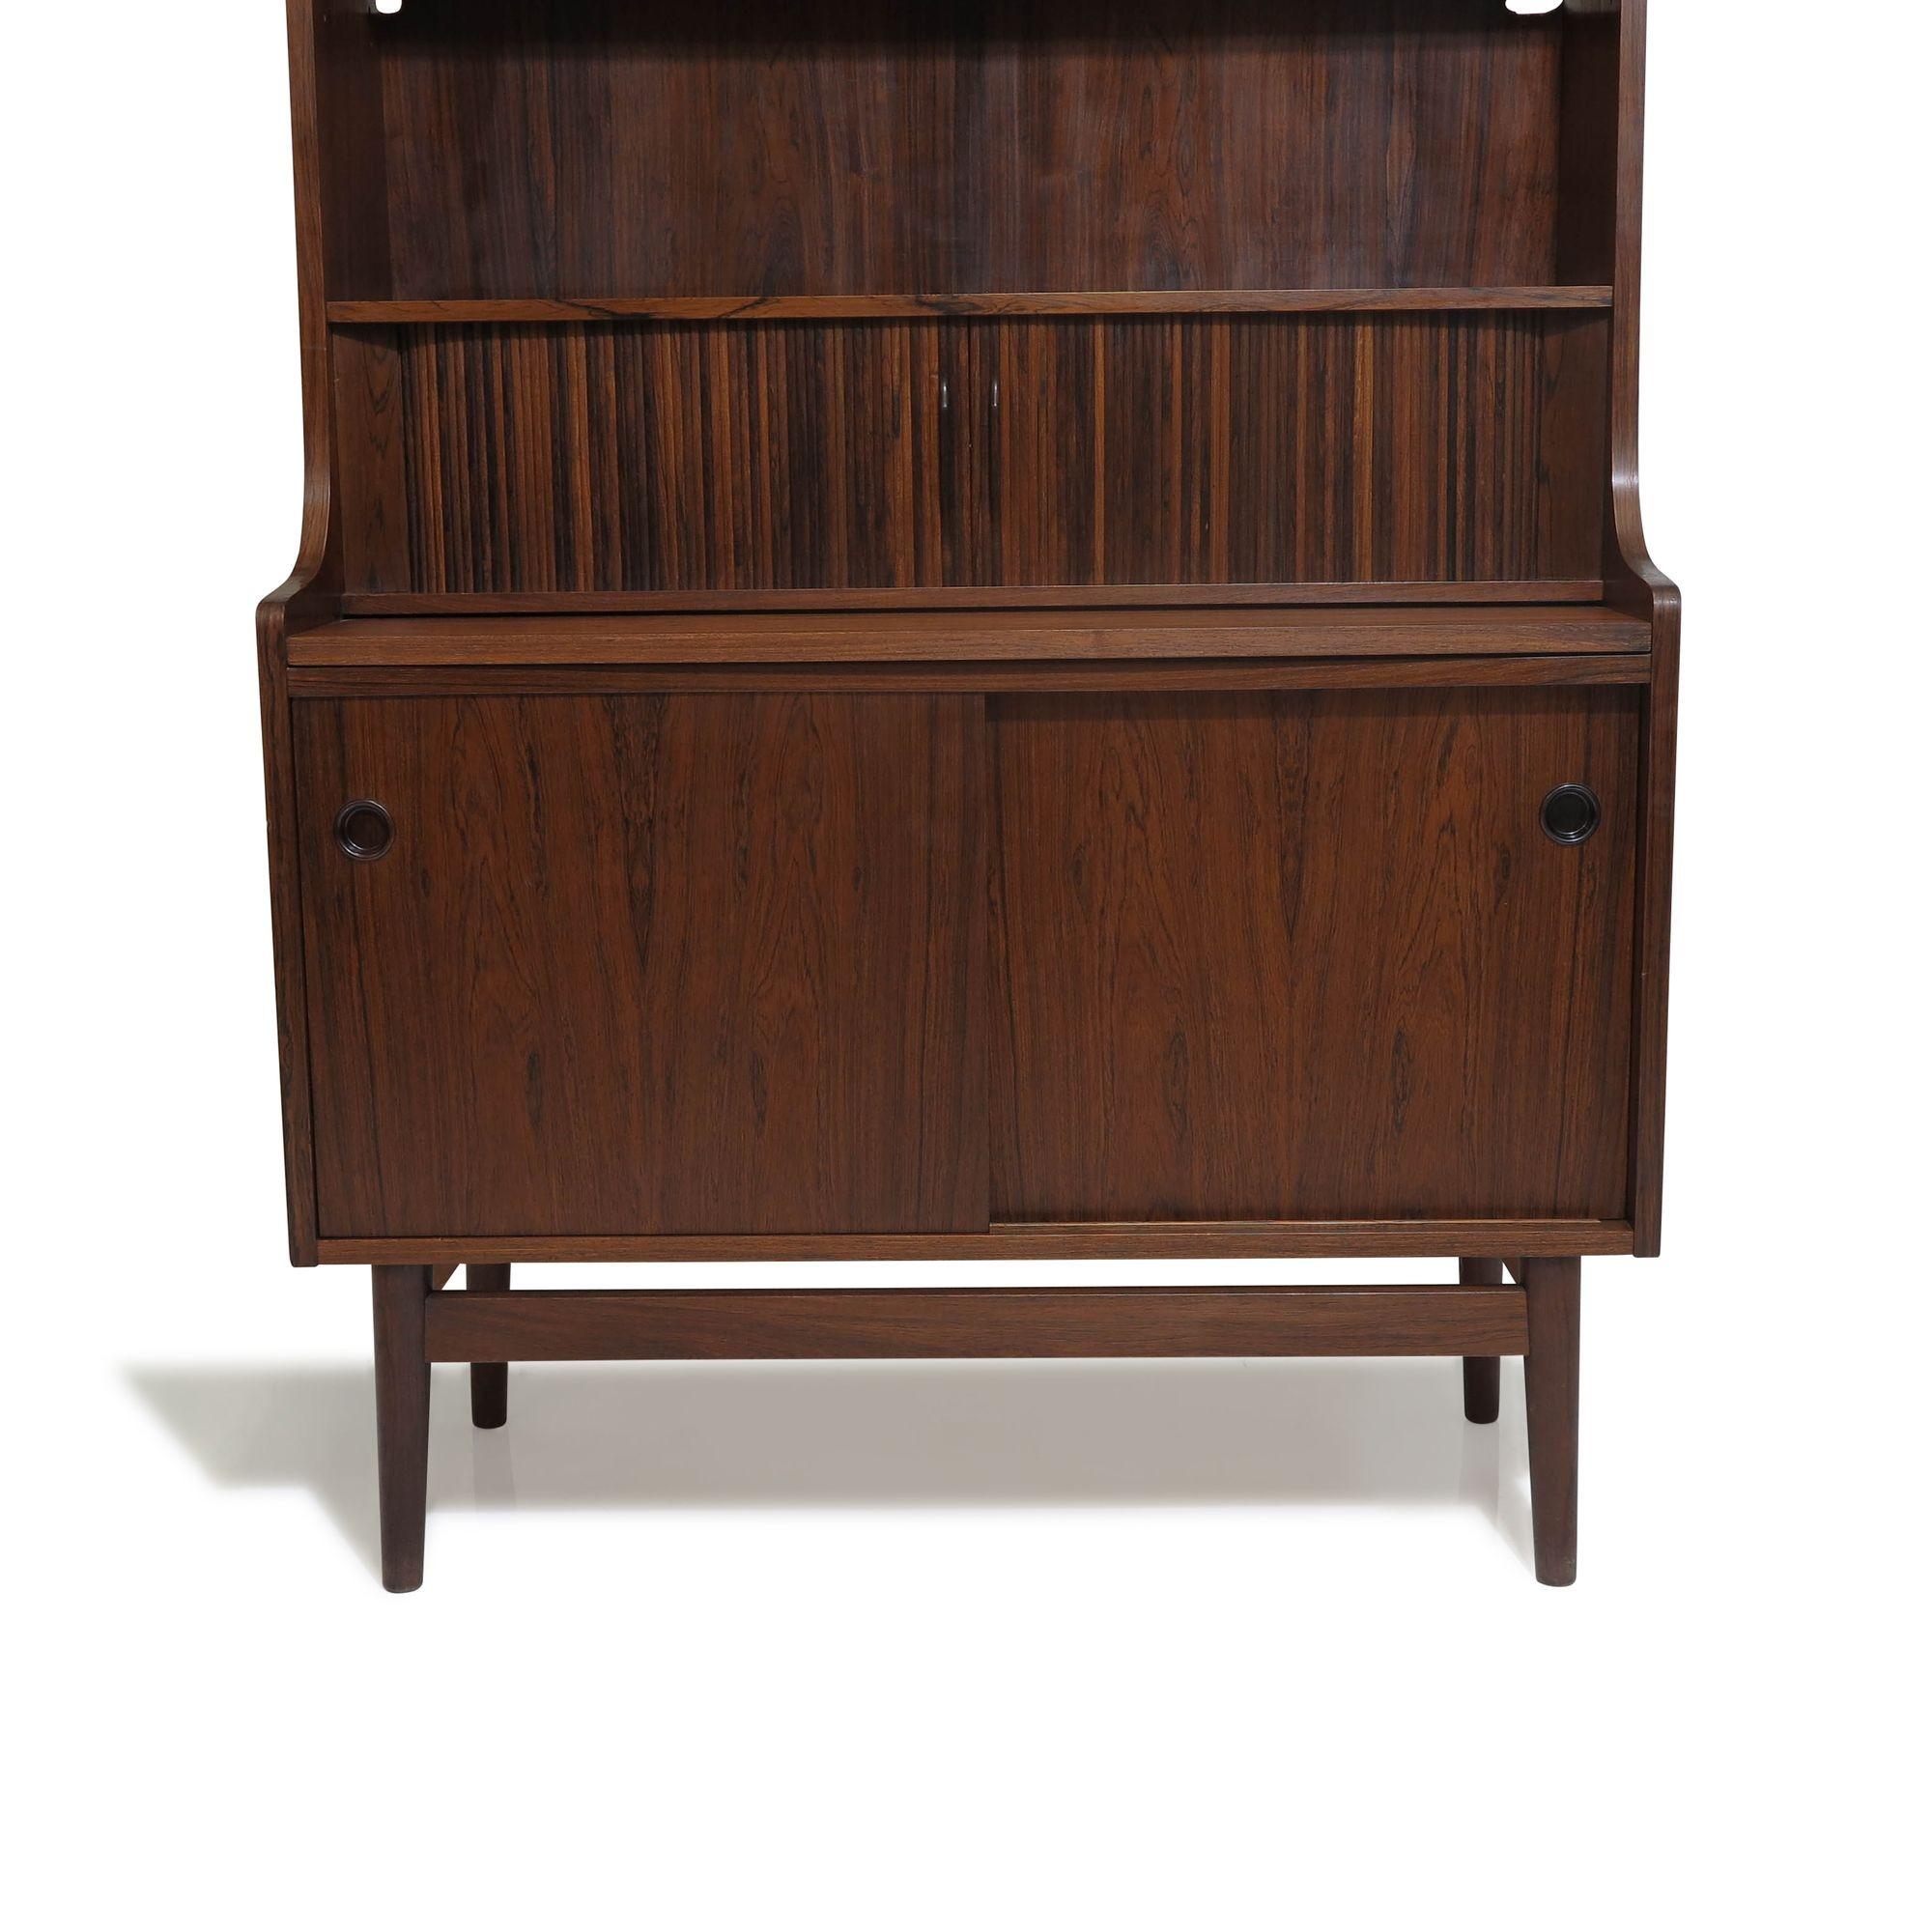 Mid century secretary desk and bookcase crafted of Brazilian rosewood with pull-out writing surface over a small cabinet with sliding doors. Mid-section has pair of solid rosewood tambour doors opening to reveal three small drawers and mail